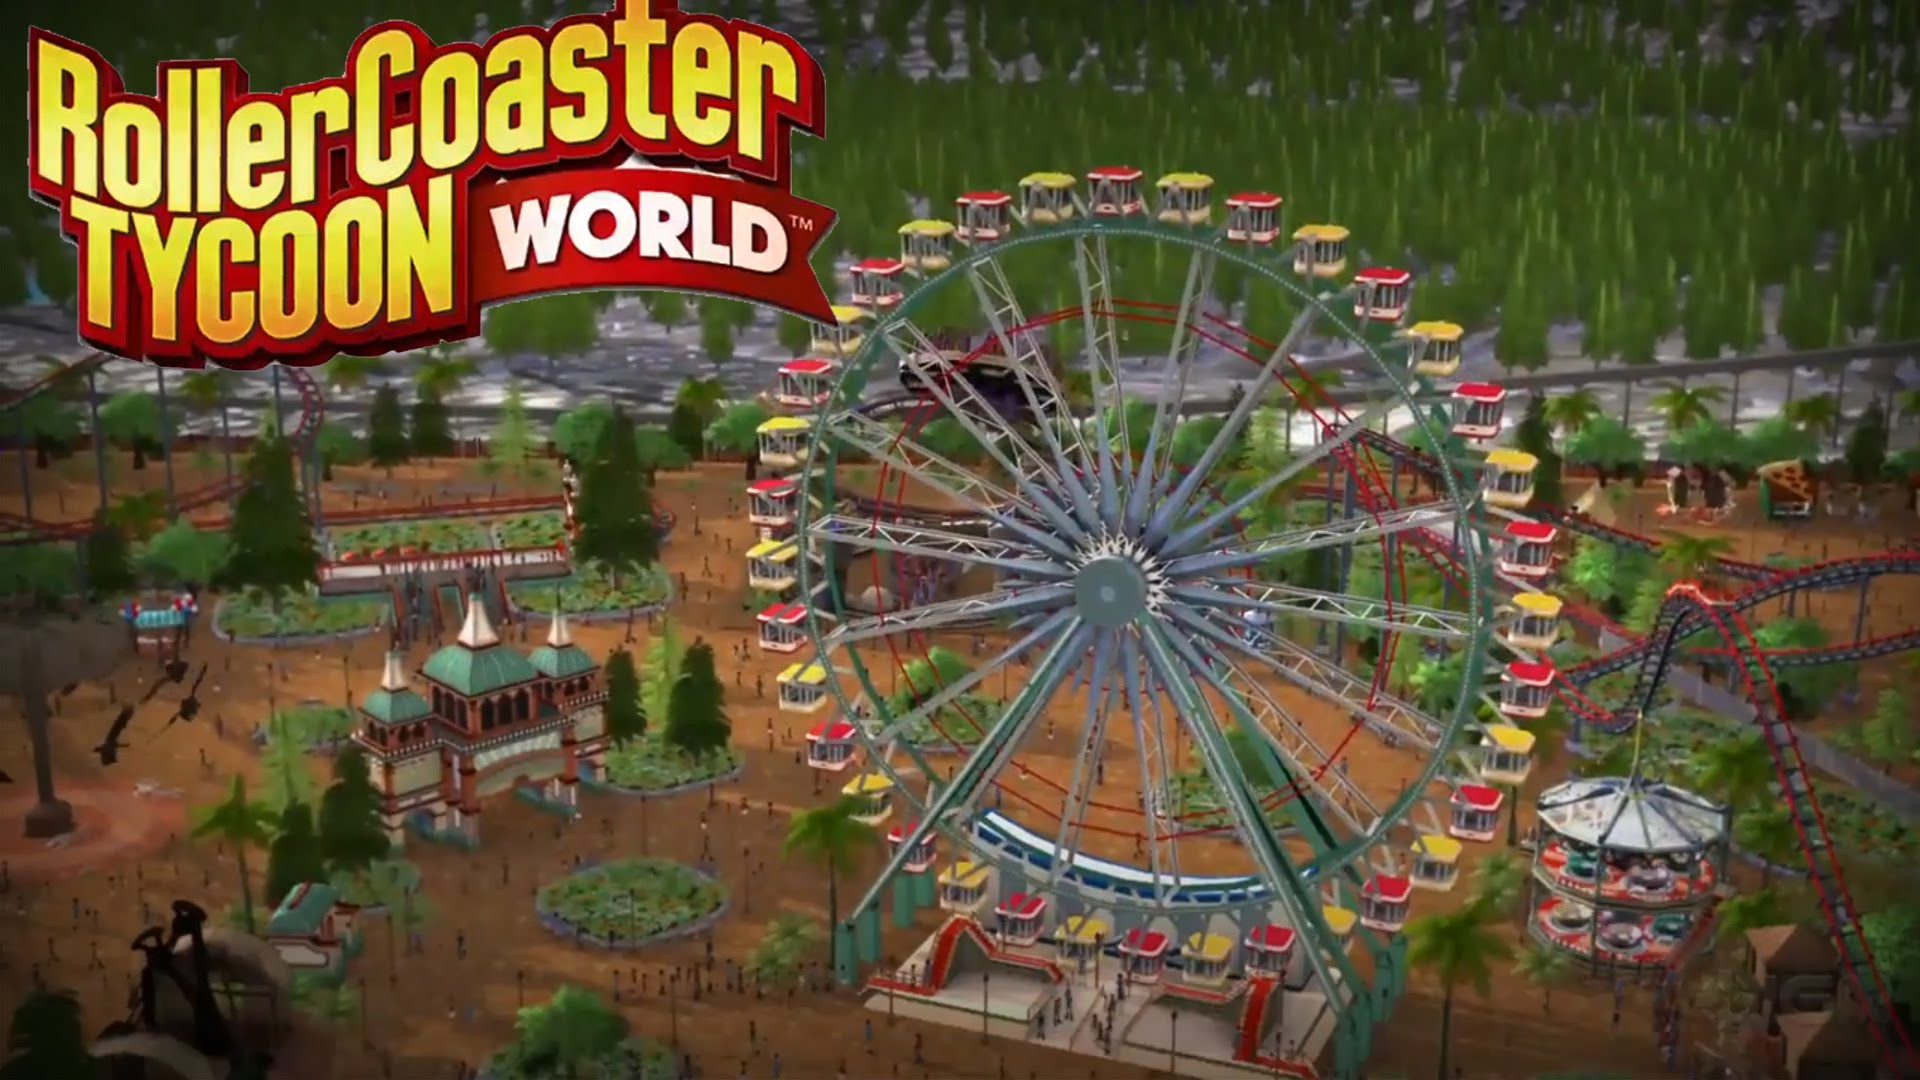 First Gameplay Footage of RollerCoaster Tycoon World Revealed